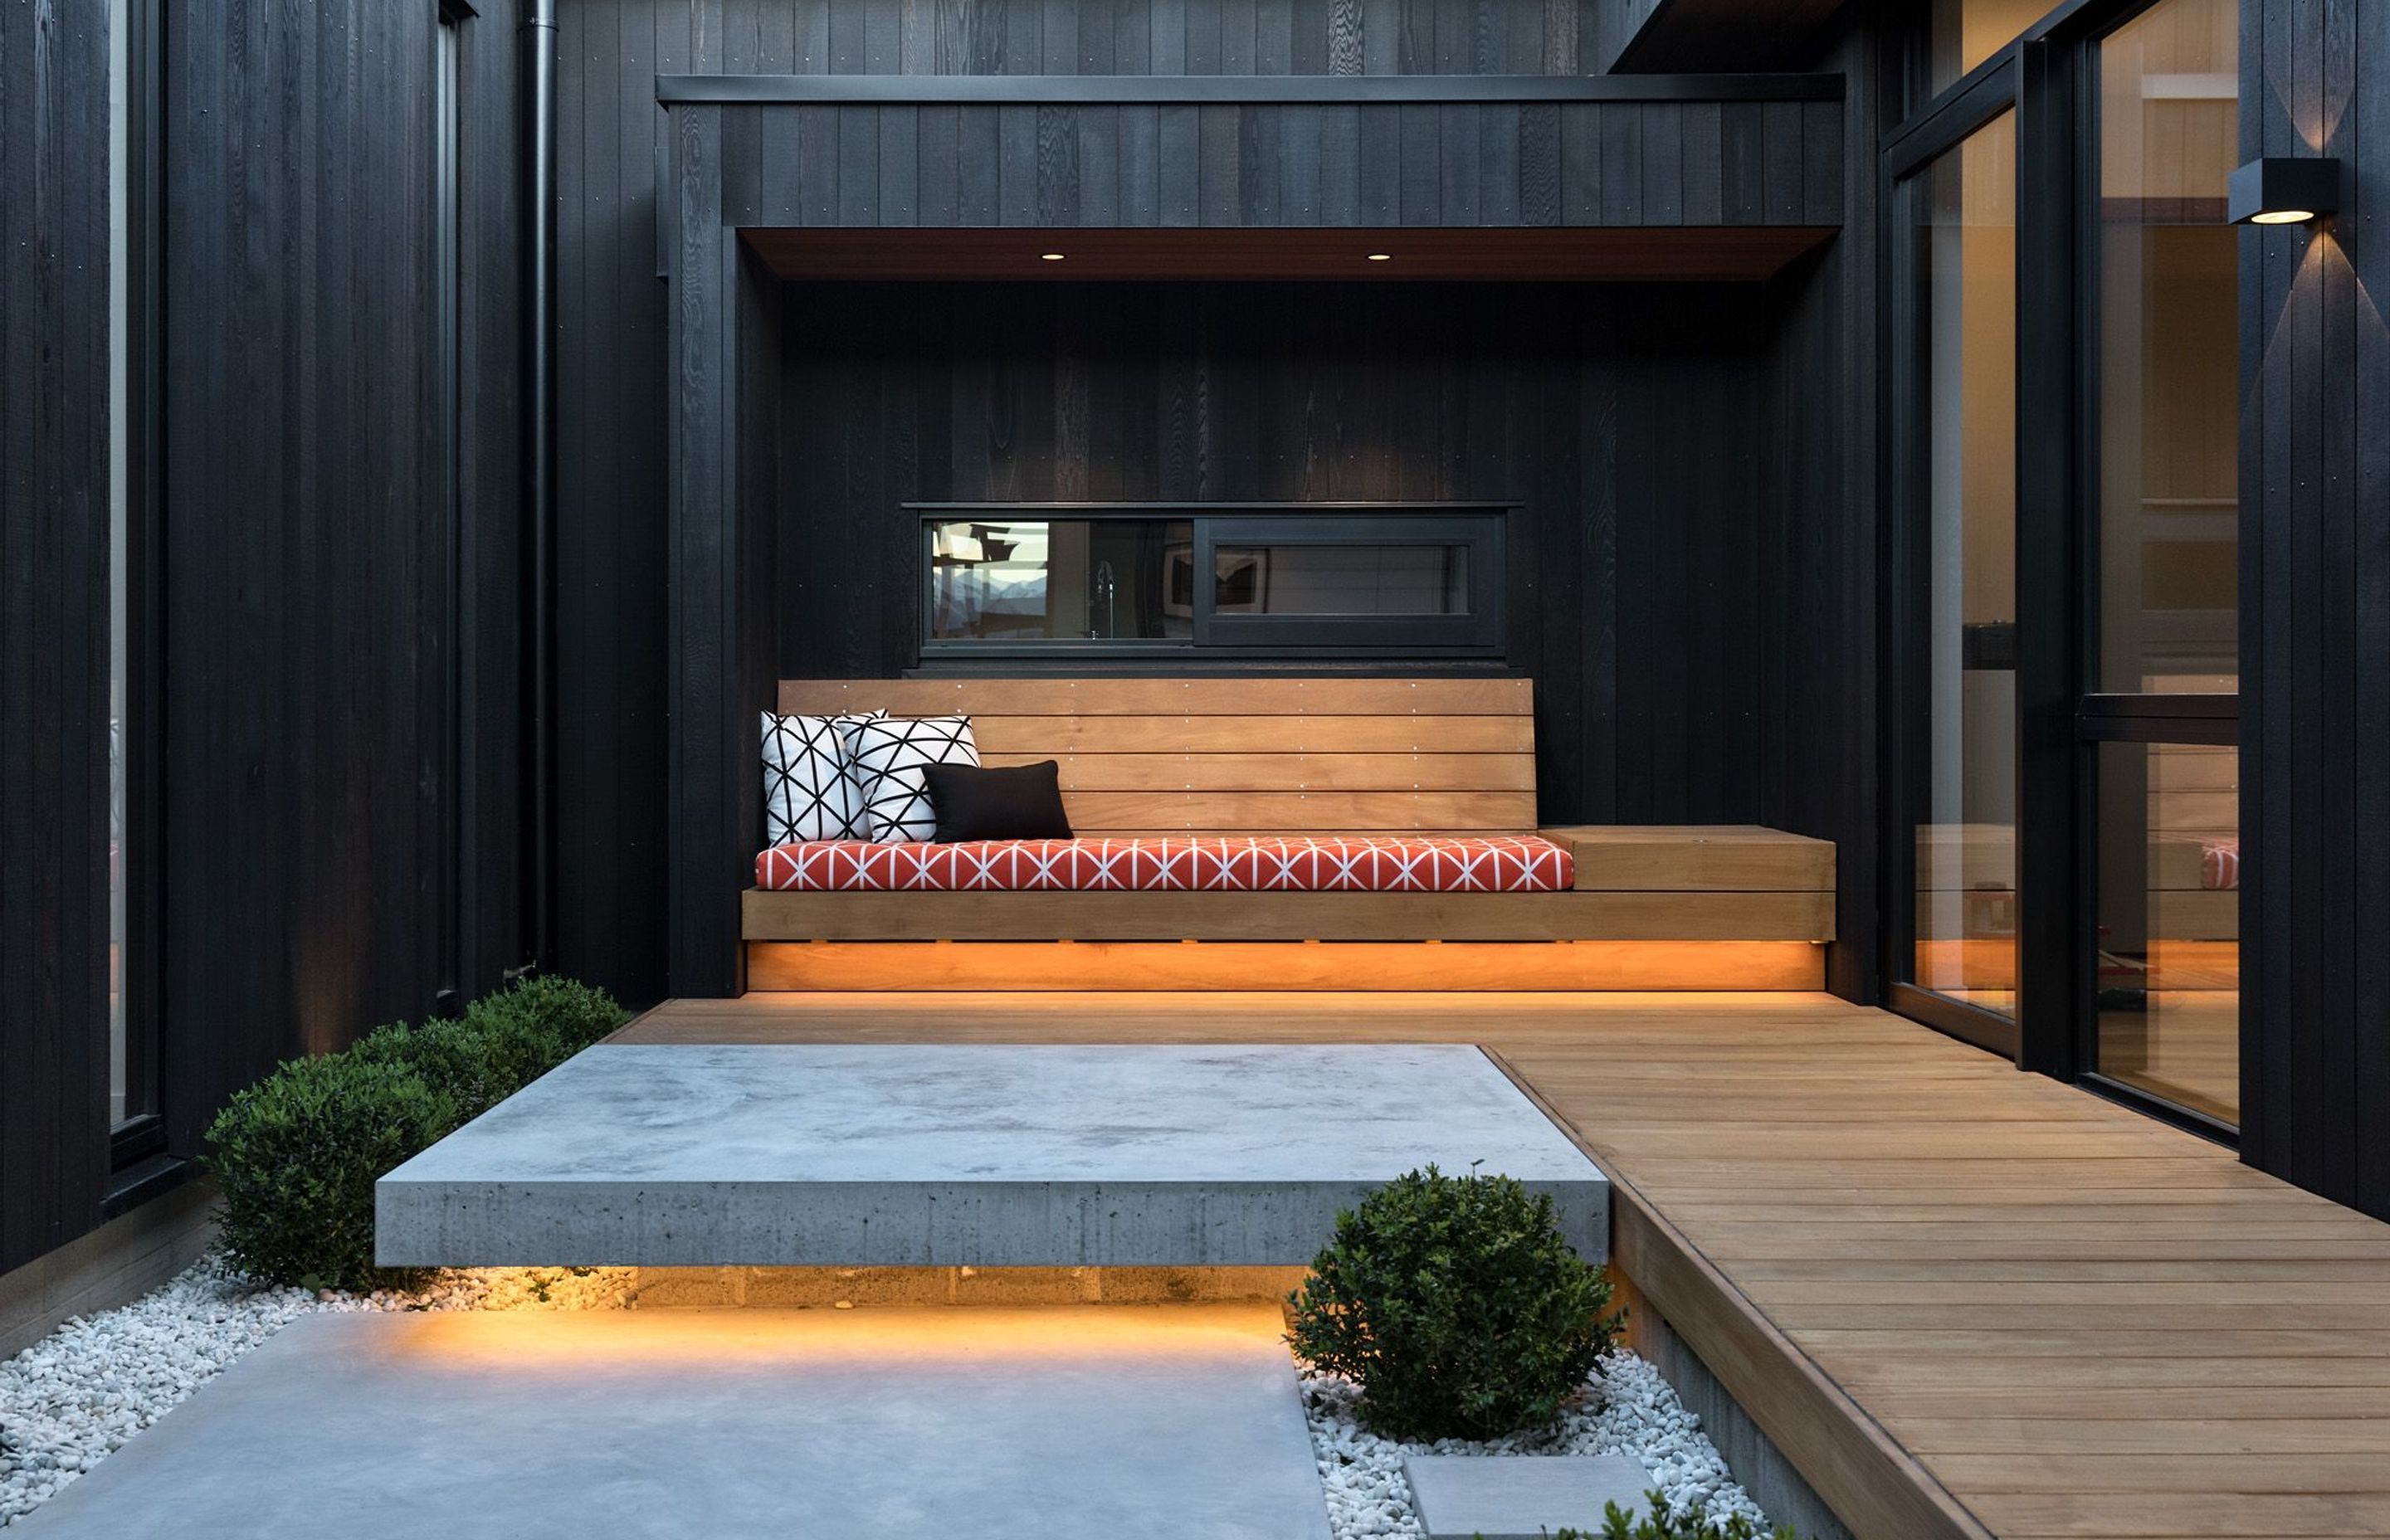 The courtyard area features underlit concrete slabs and oiled timber decking and seating.